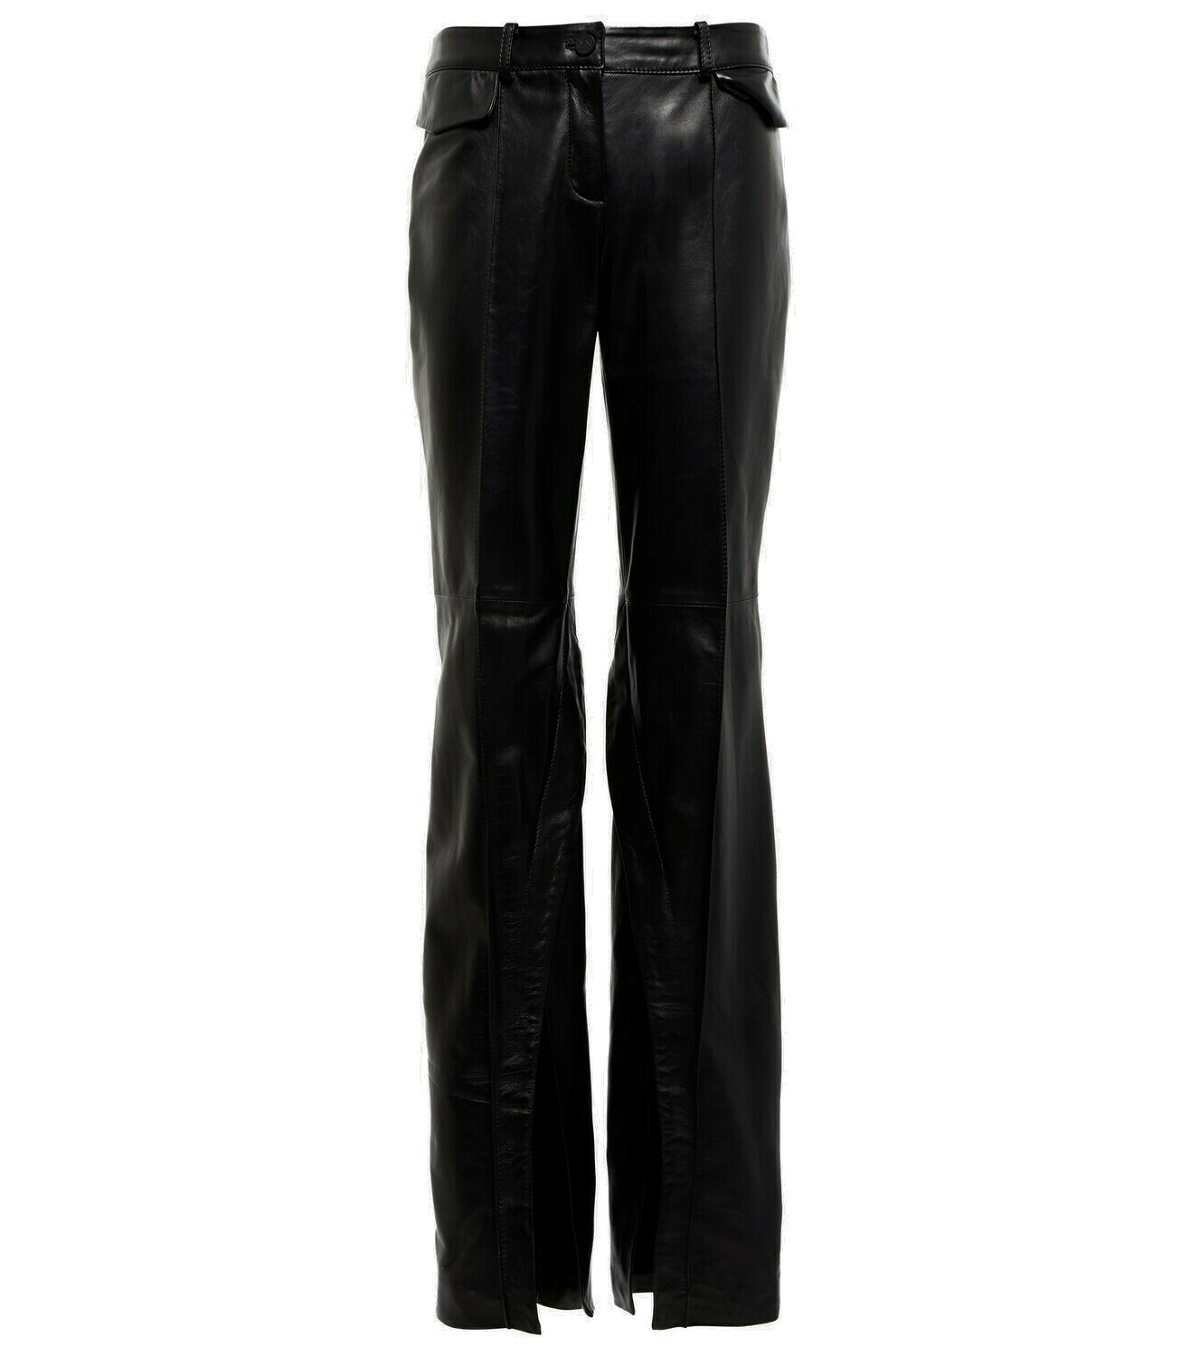 Photo: The Mannei Ventura leather pants